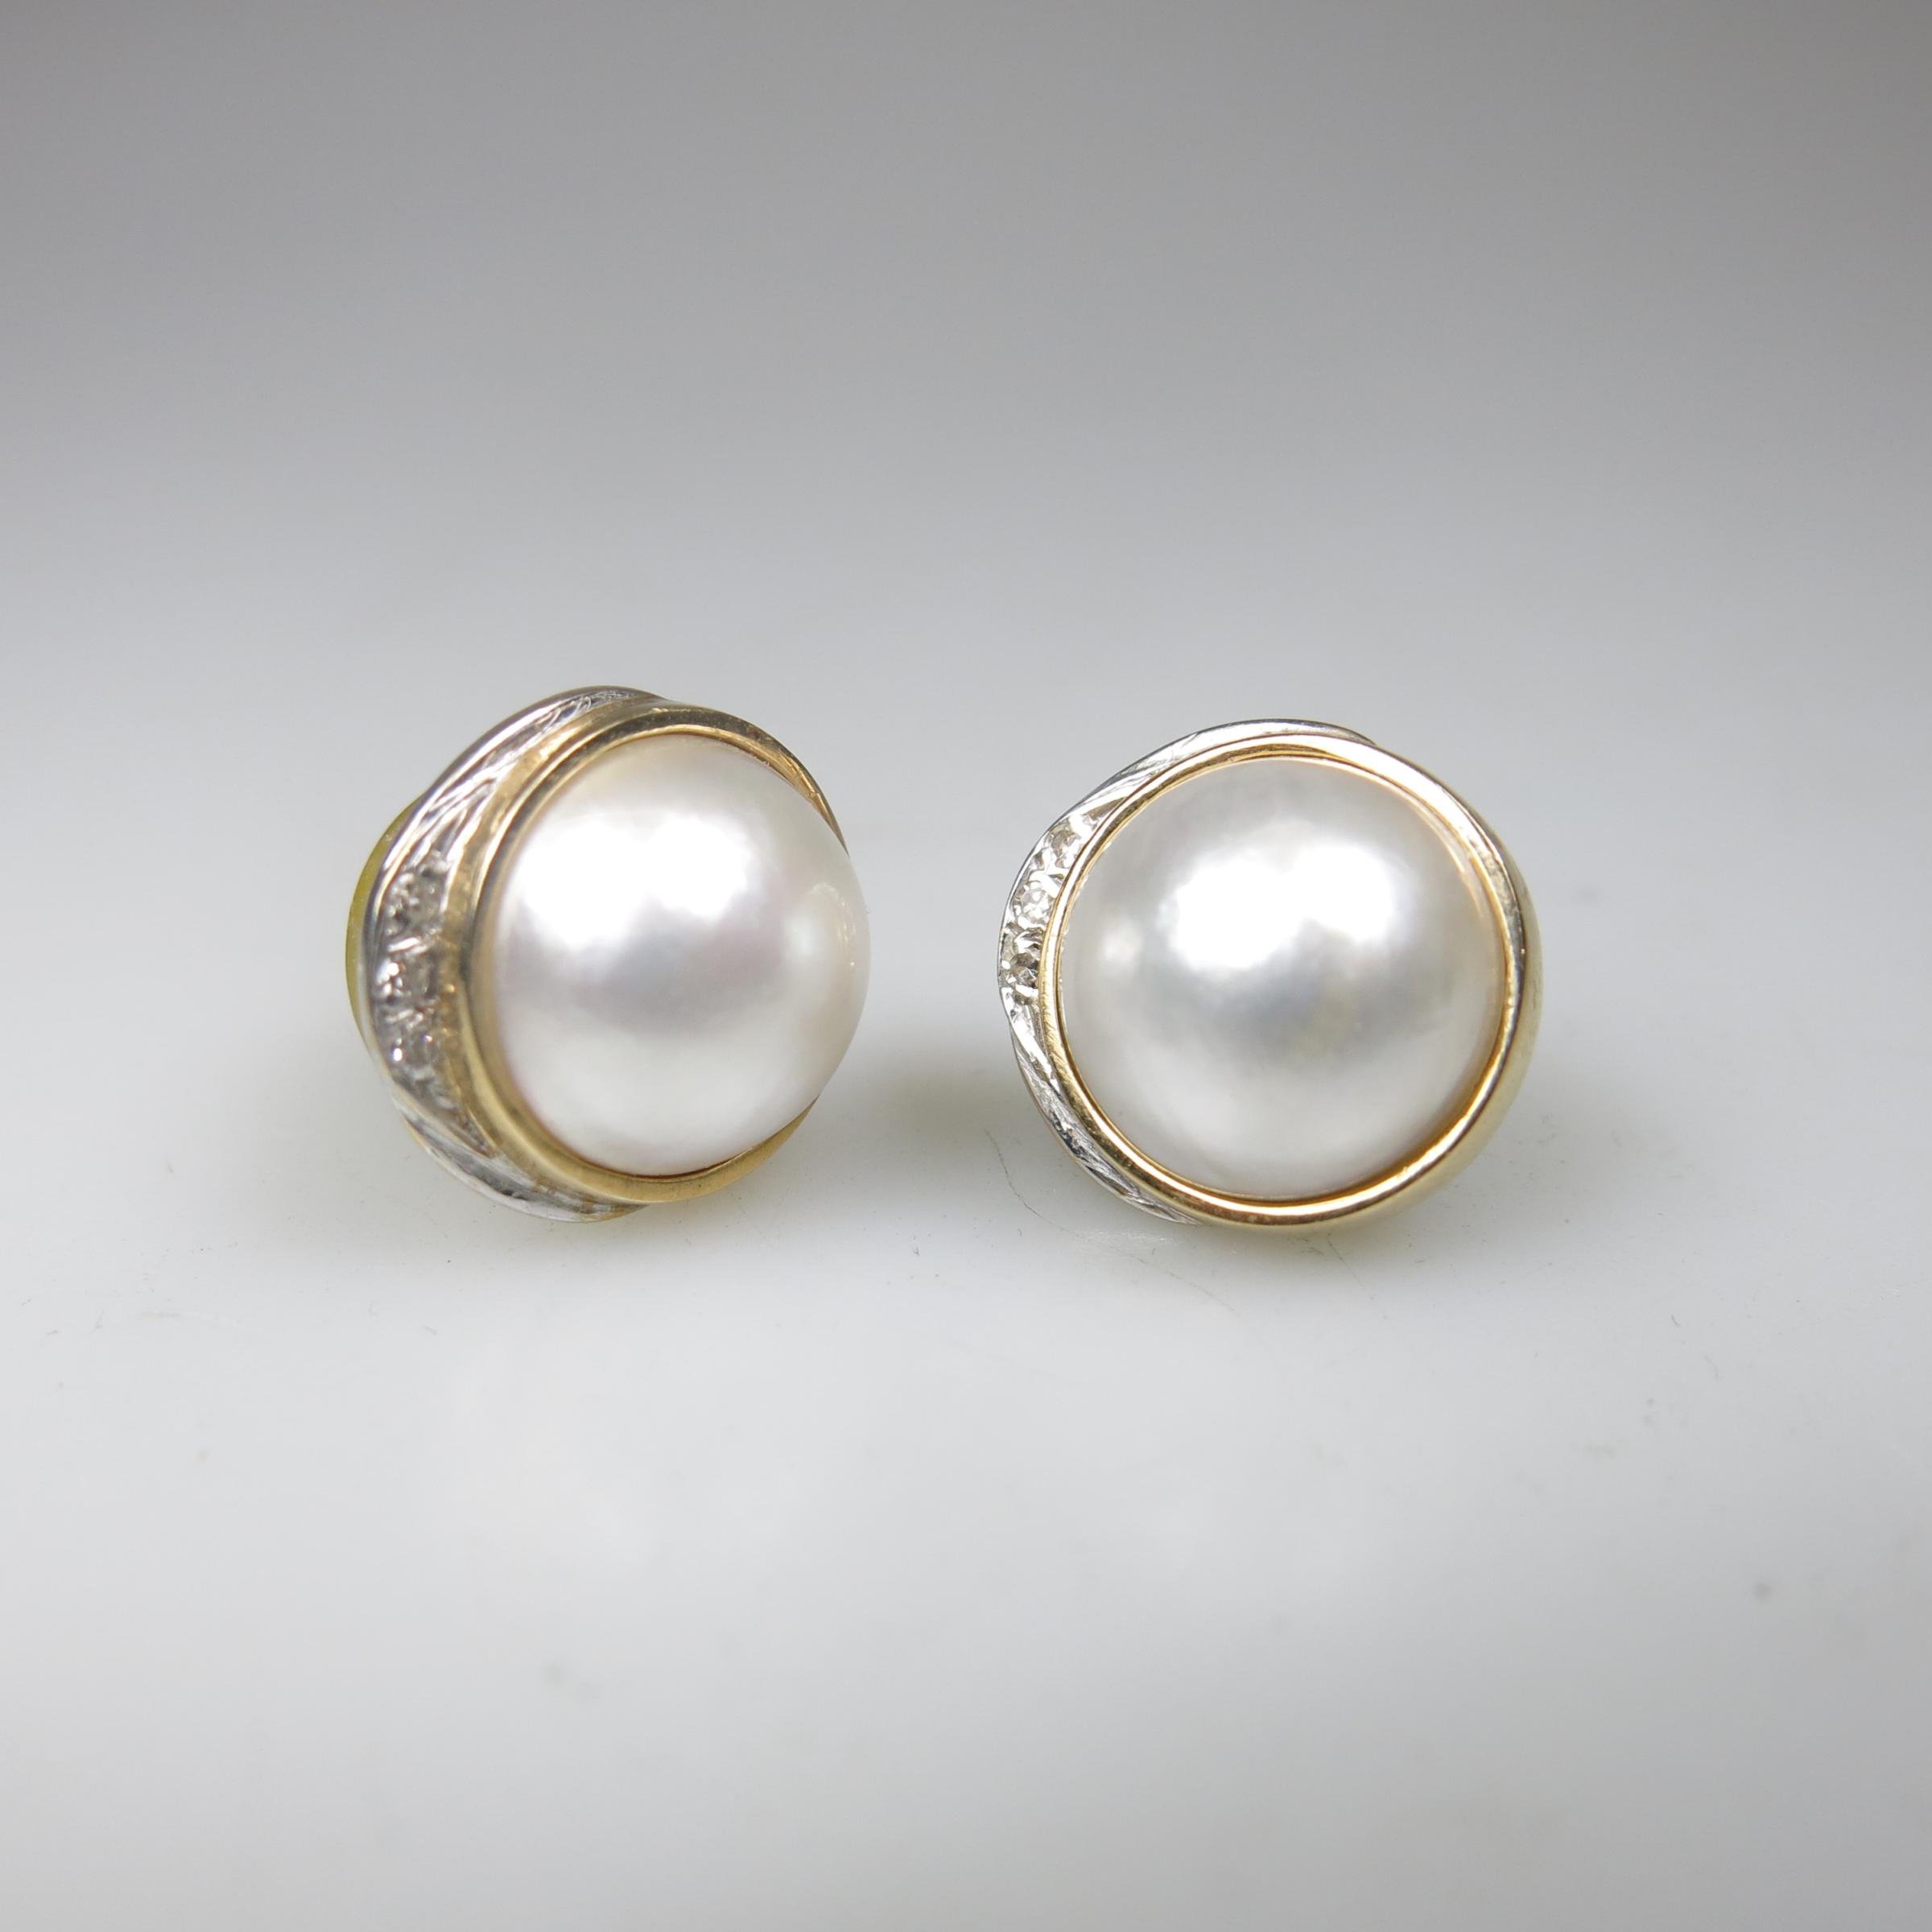 Pair Of 14k Yellow And White Gold Button Earrings